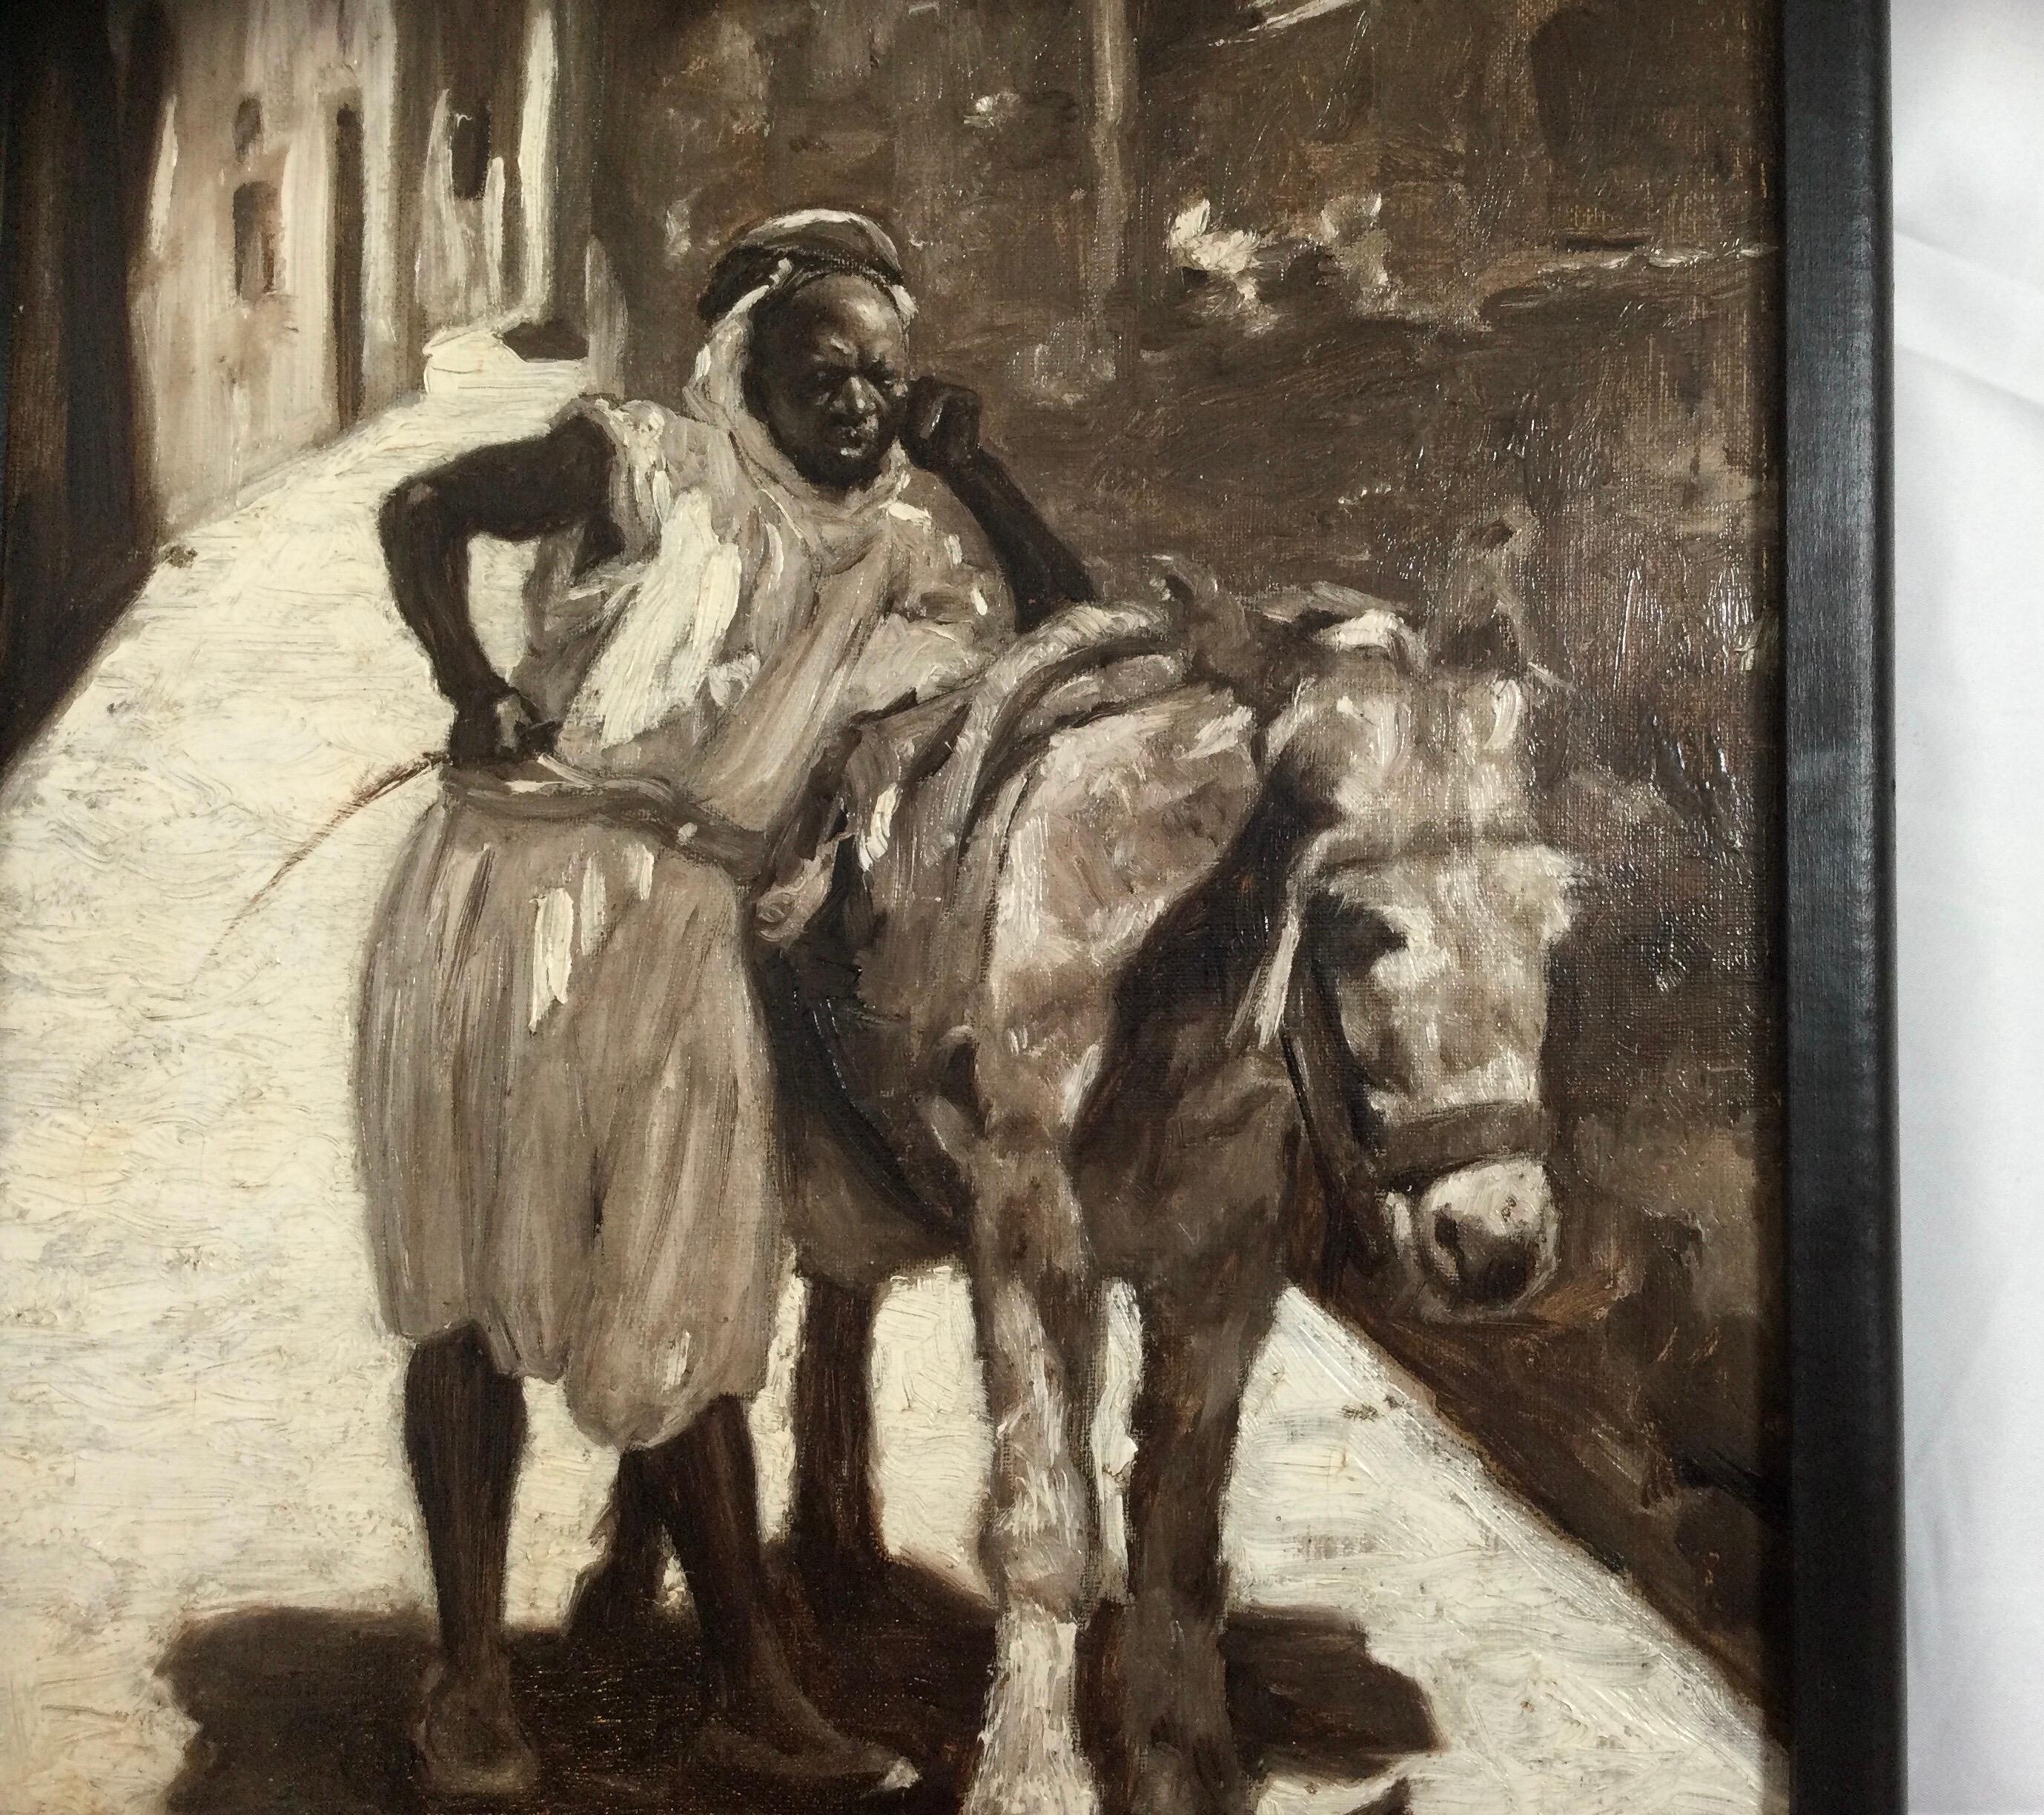 Exceptional monochrome Orientalist work depicting a man leaning on his donkey in an alleyway. Despite the impressionistic brush strokes the man's face appears almost photo realistic. Signed lower left by James Kinsella (1857-1923). He painted in USA